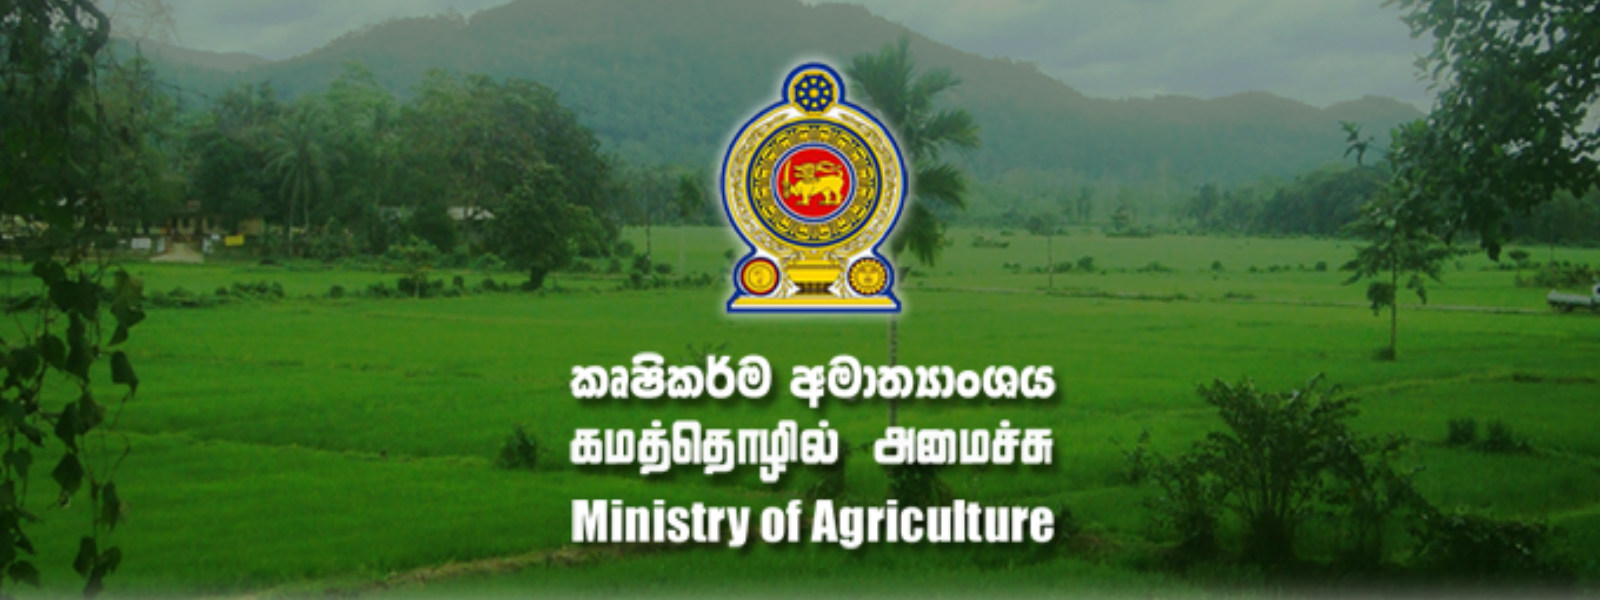 Ministry of Agriculture to be moved to Govijana Mandiraya